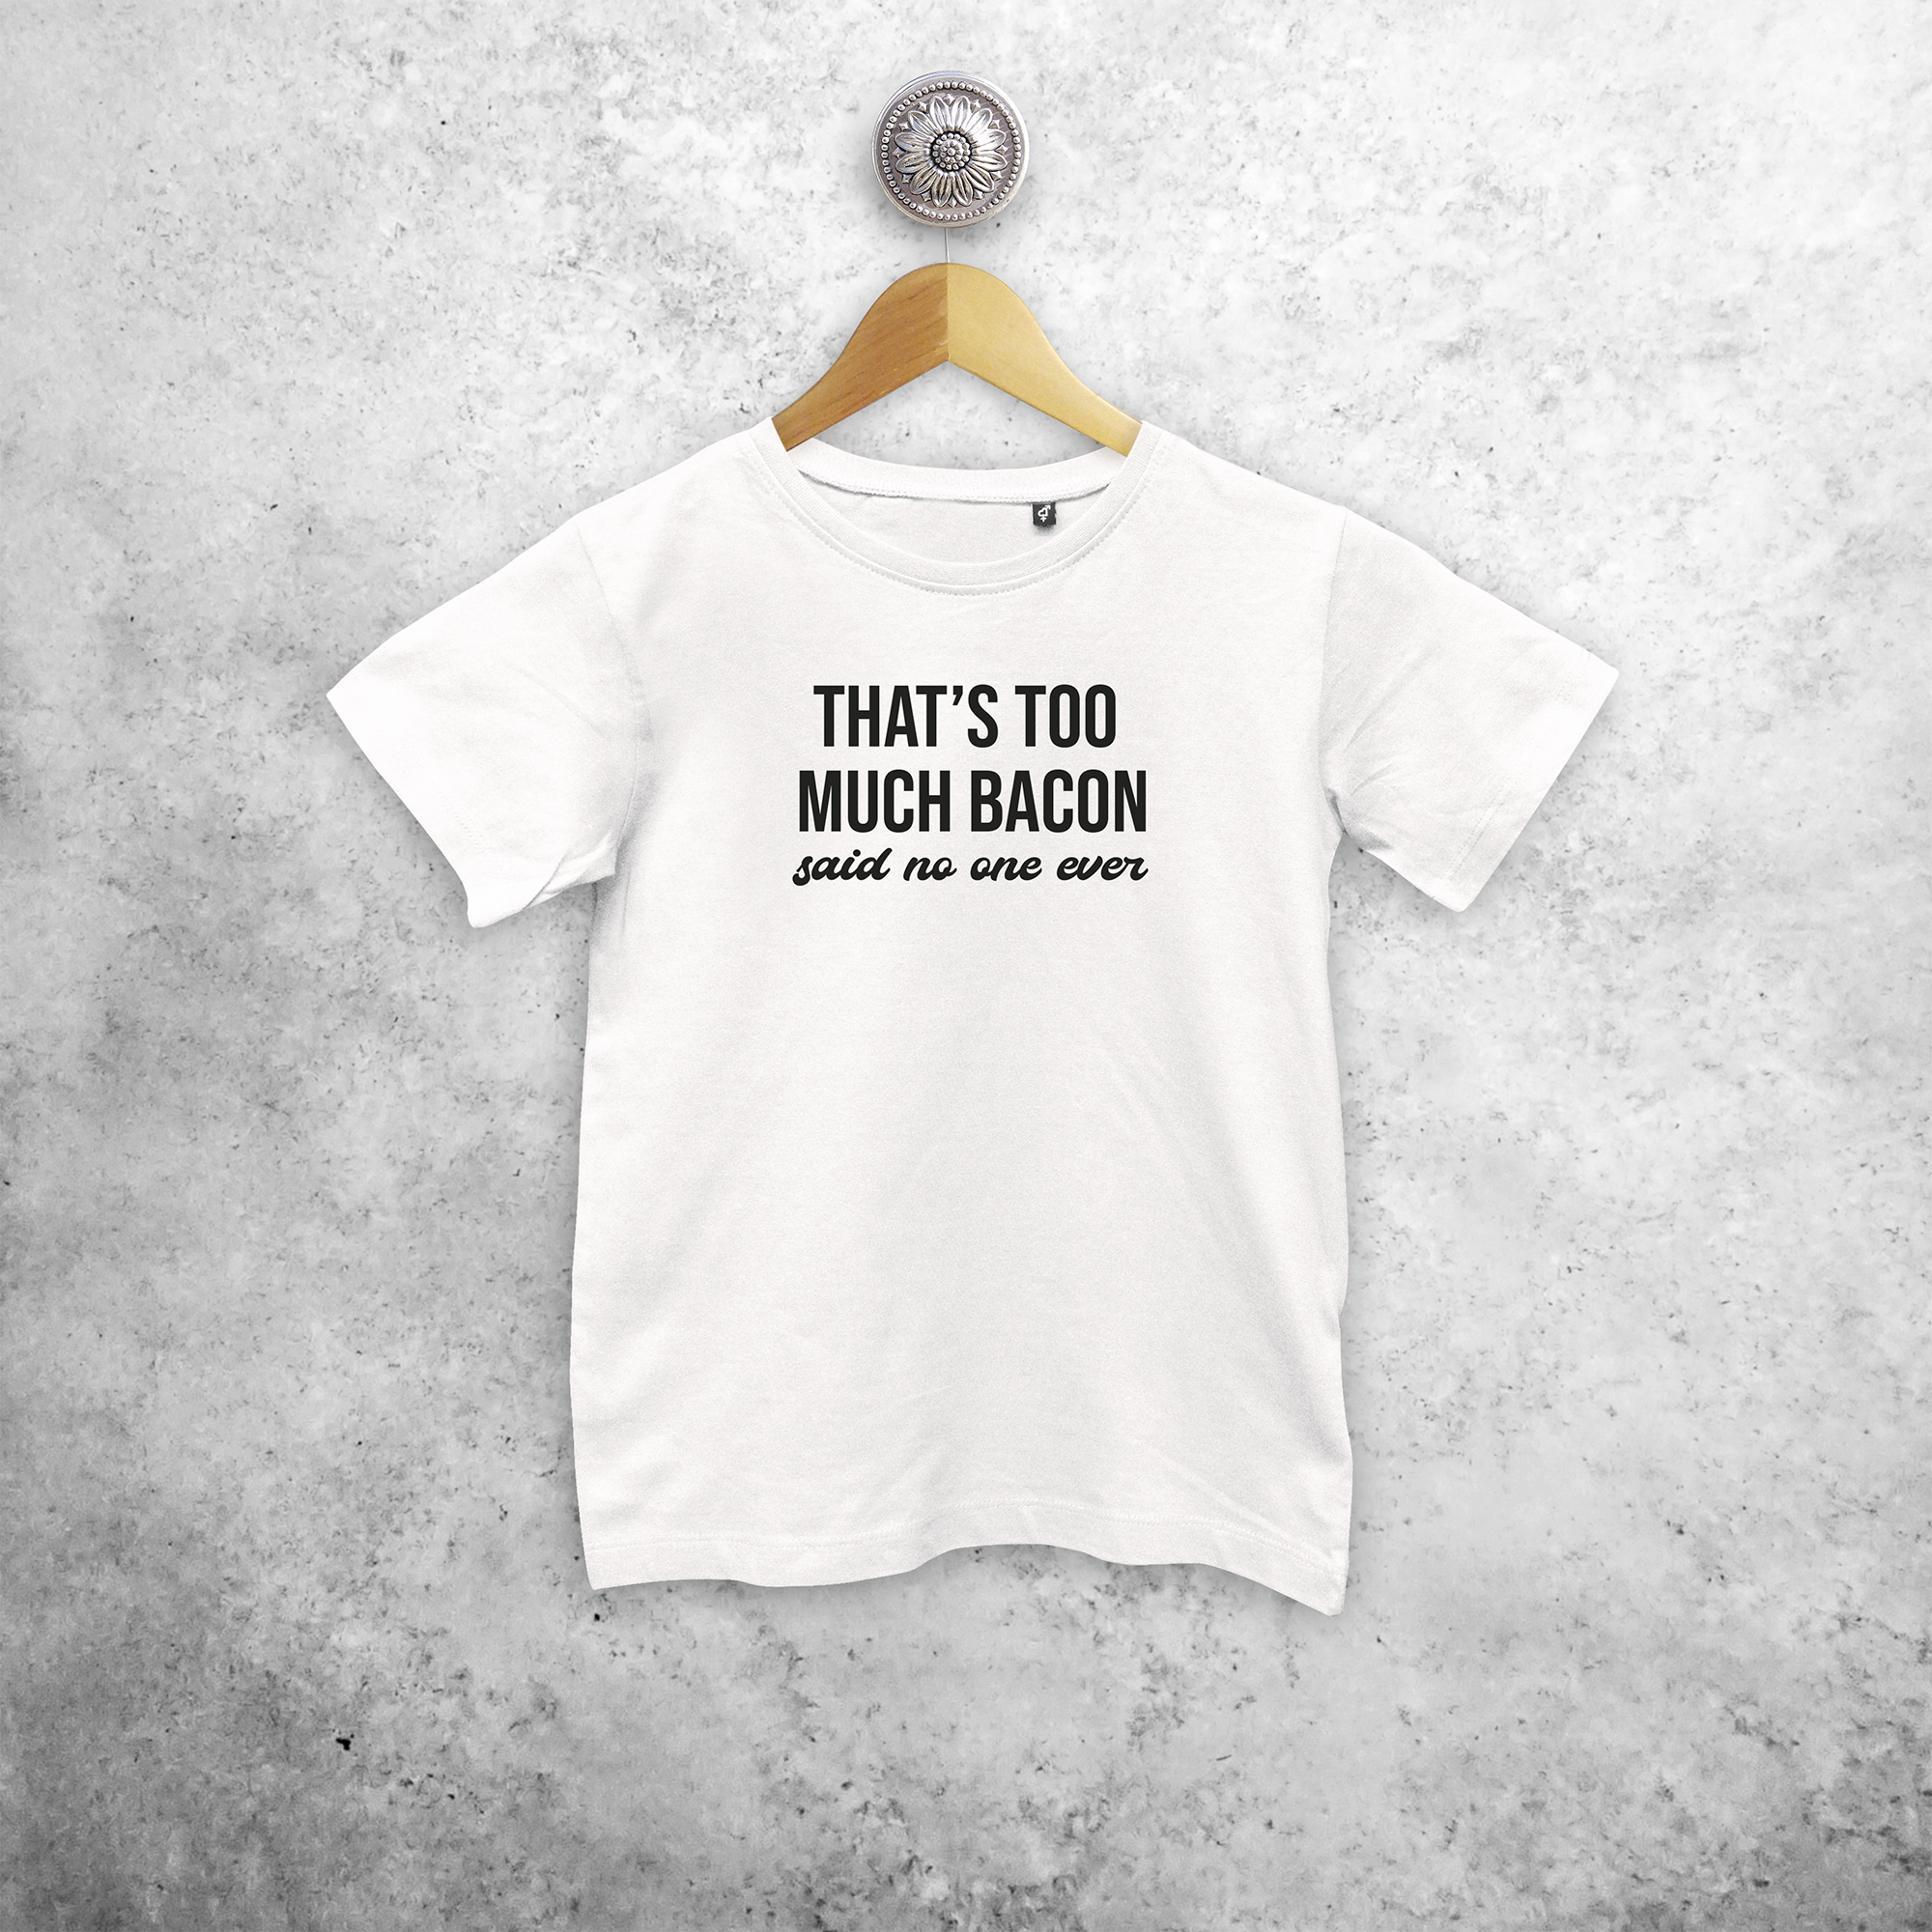 'Thats too much bacon. Said no one ever' kind shirt met korte mouwen